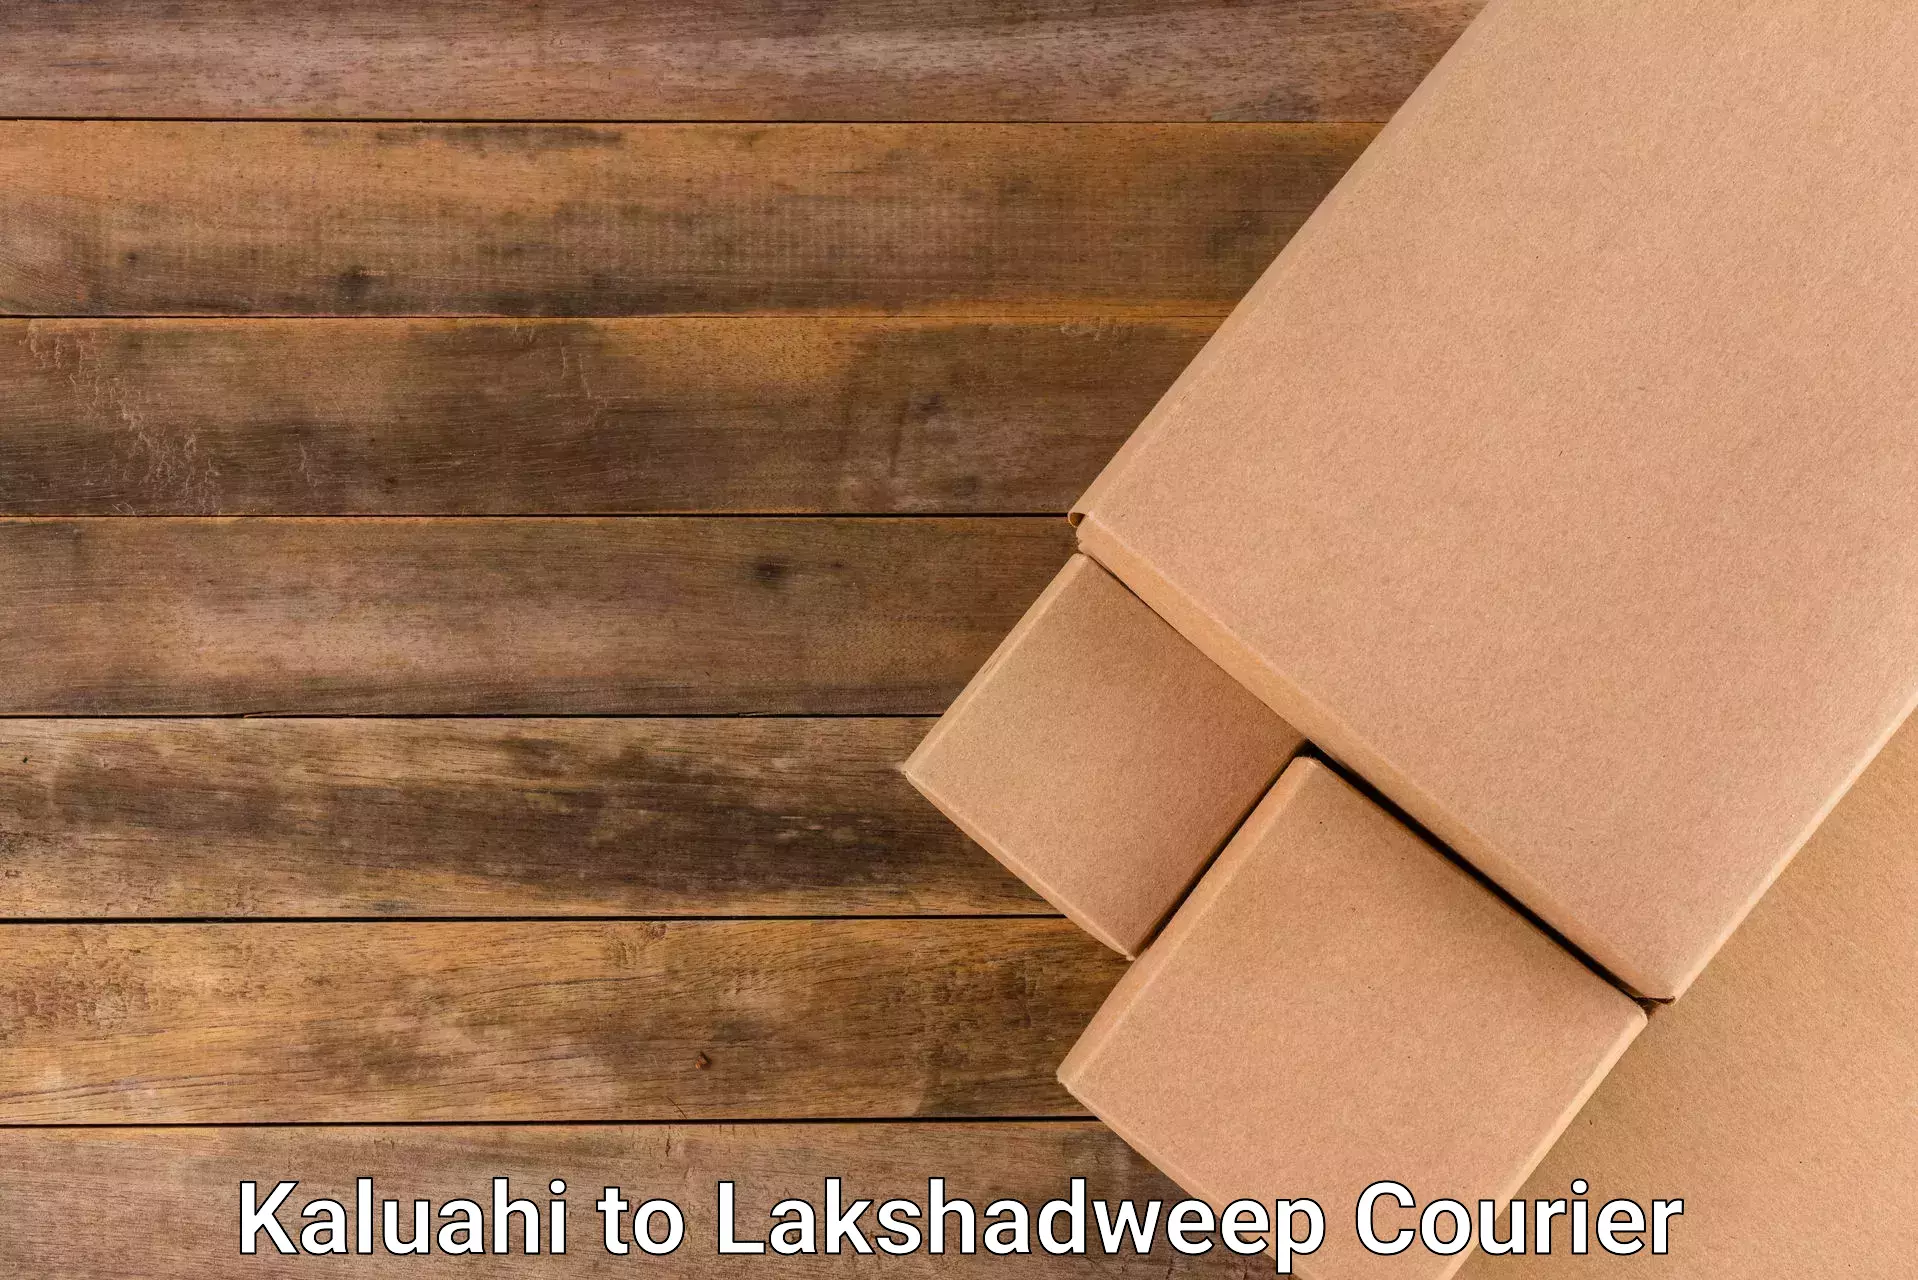 Courier service innovation Kaluahi to Lakshadweep